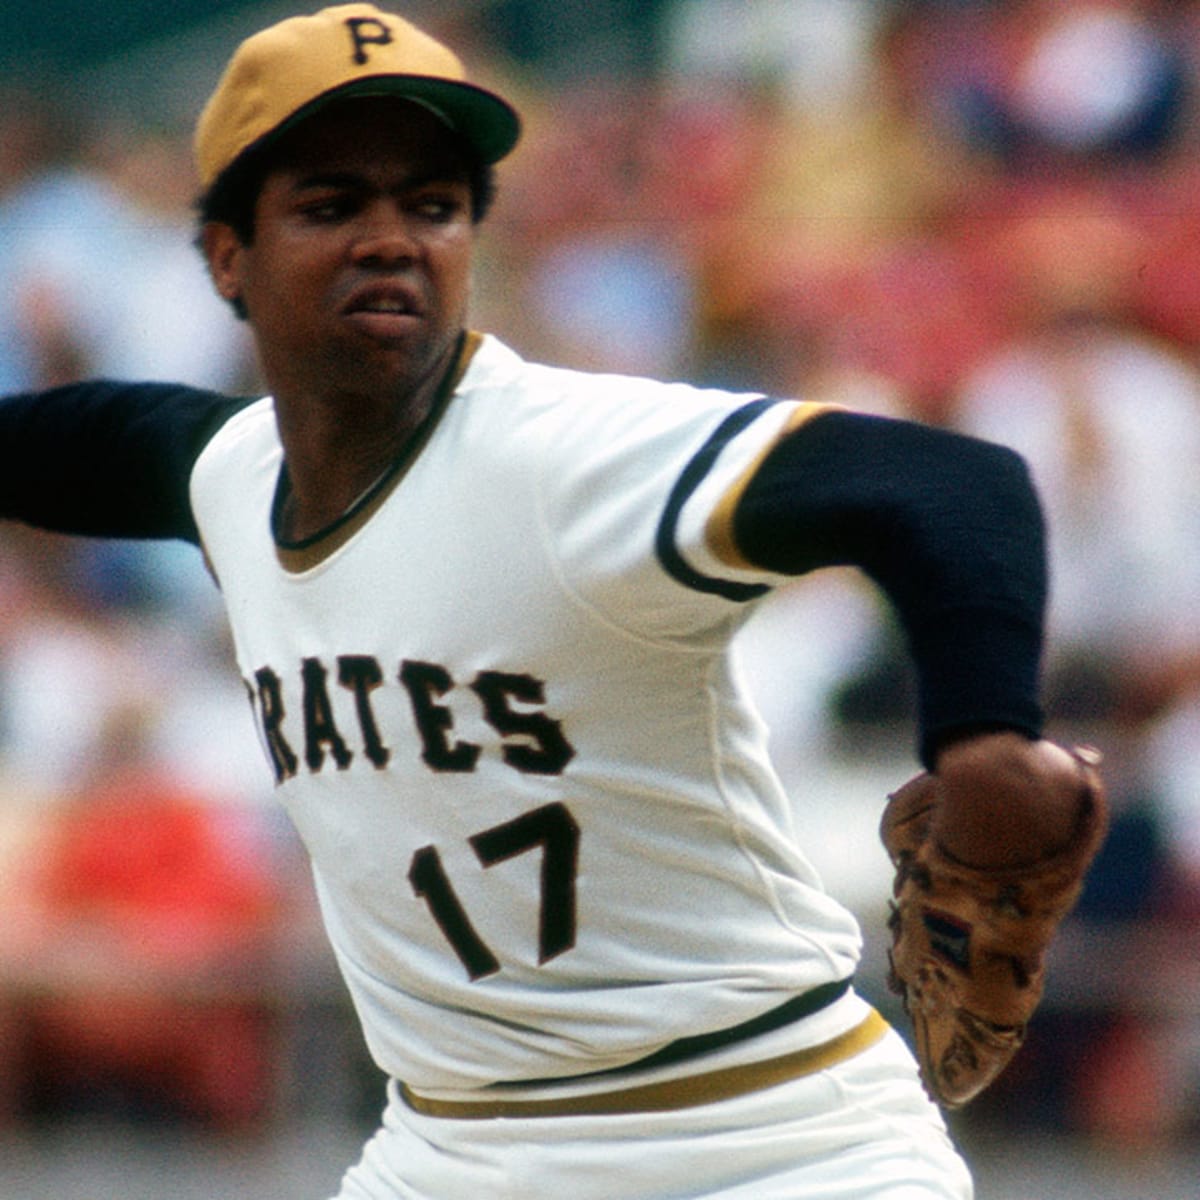 Dock Ellis' legacy is more than his crazy — and now 50-year-old